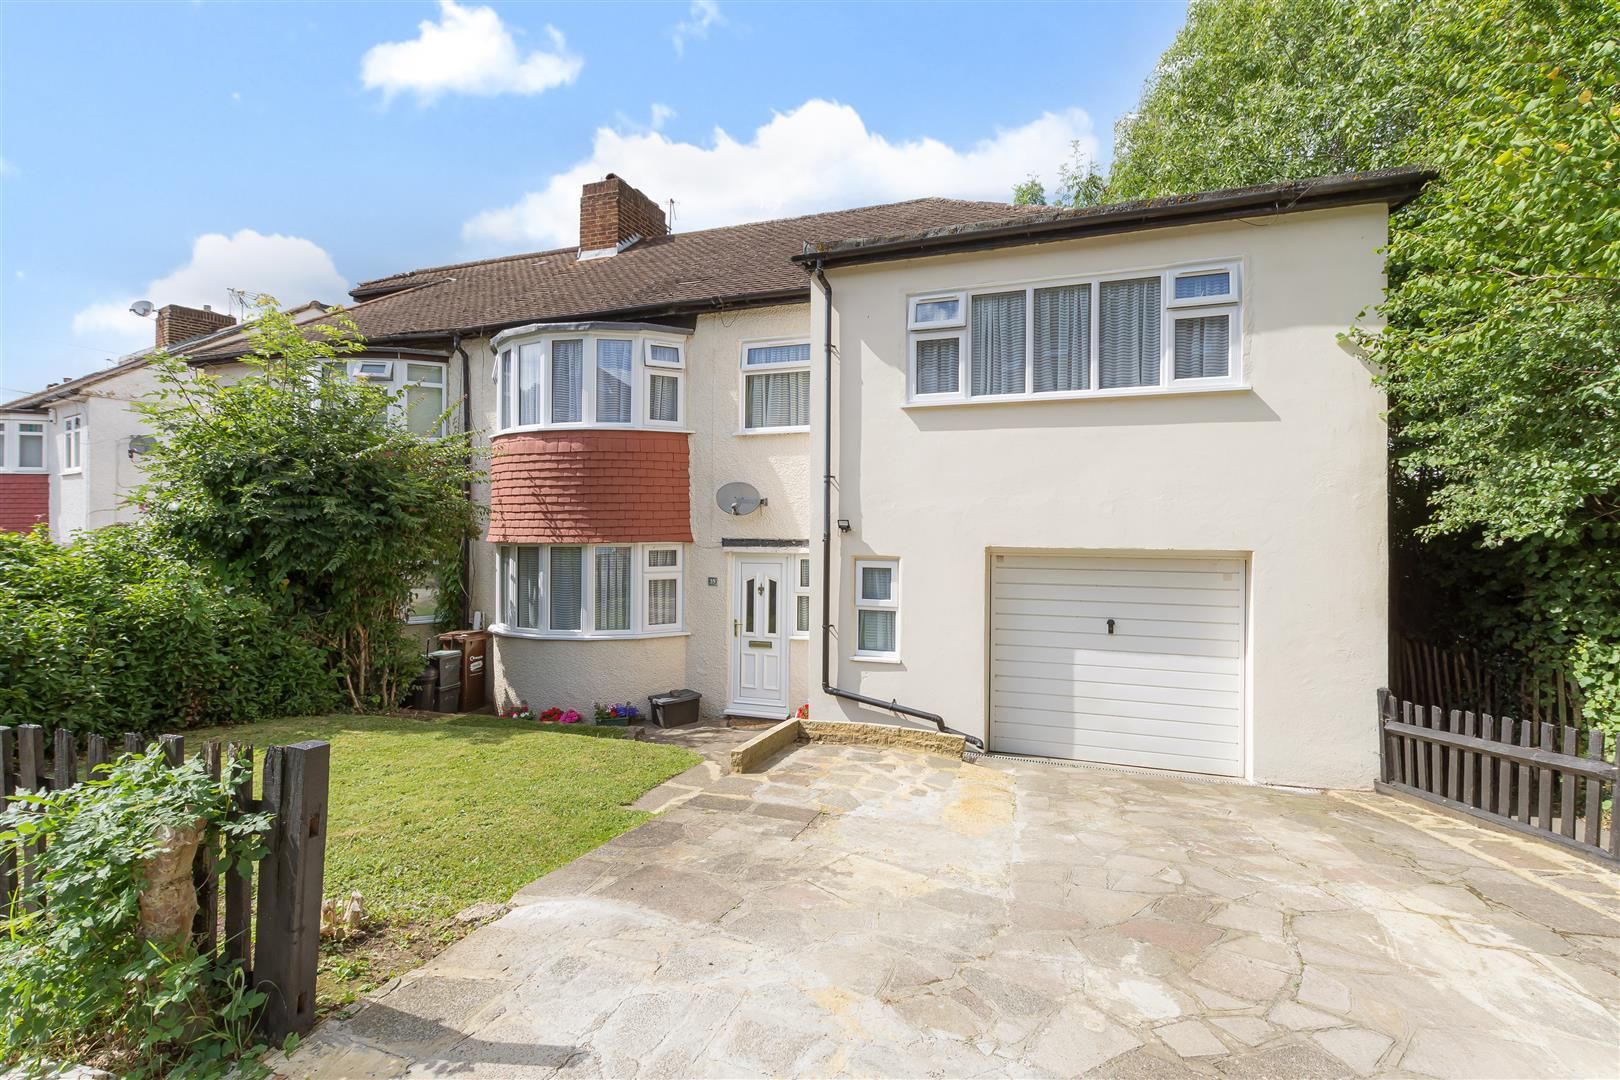 Copthorne Avenue, Bromley, Kent, BR2 8NW